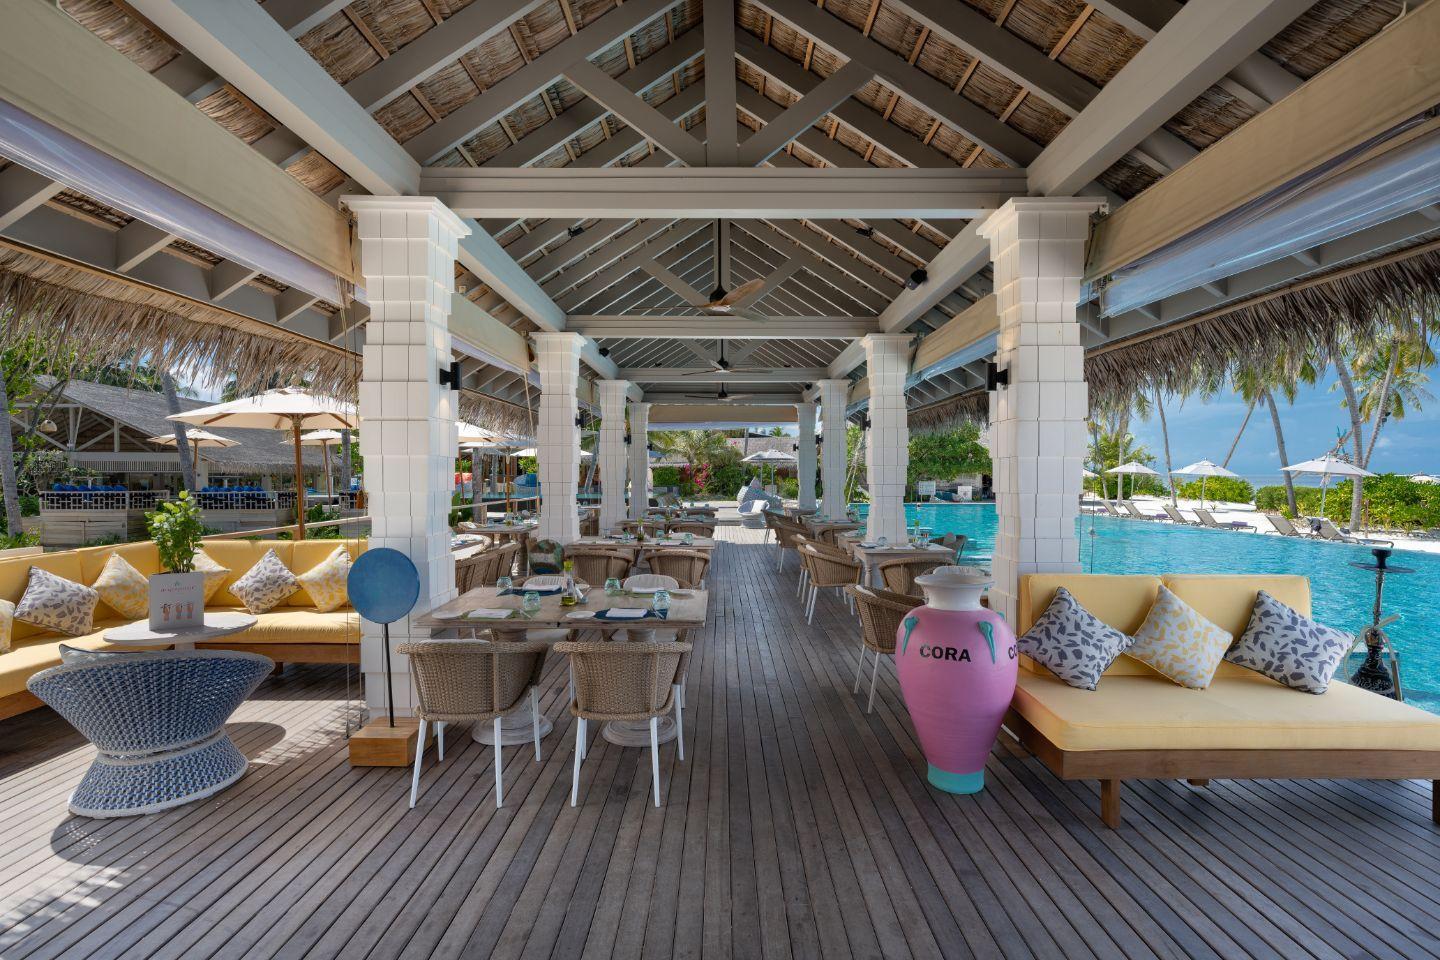 New years deal at all inclusive Cora Cora Maldives for 7 Nights 